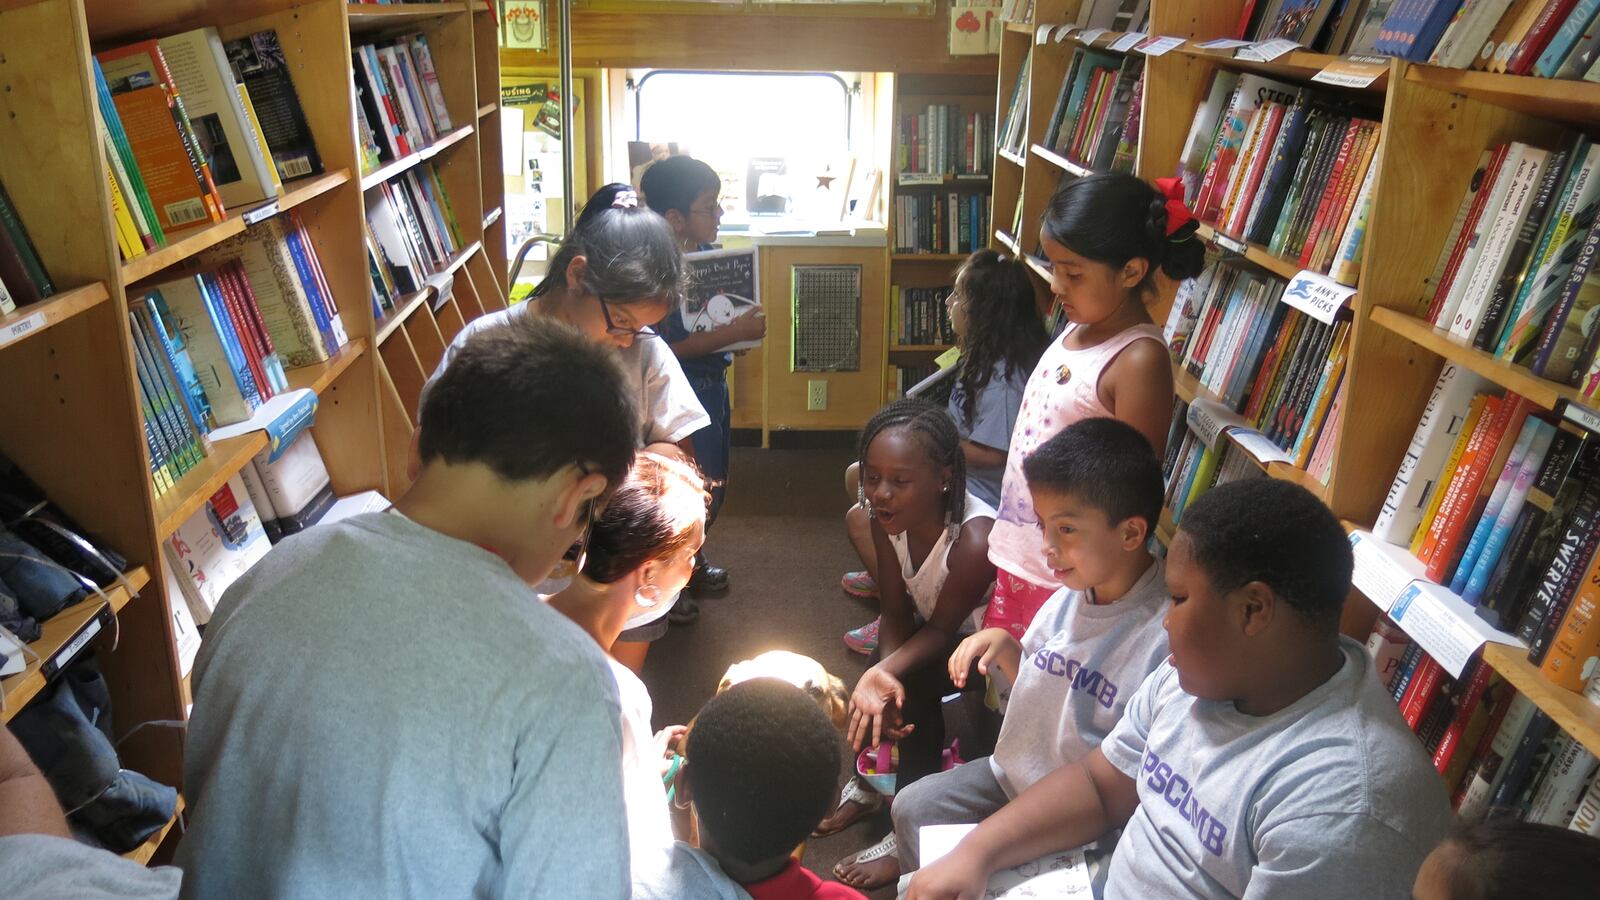 Students at Nashville's J.E. Moss Elementary School check out reading options on a bookmobile sponsored by Parnassus Books, a local bookstore. A new citywide initiative aims to bring in more community partners to support the district's literacy efforts.